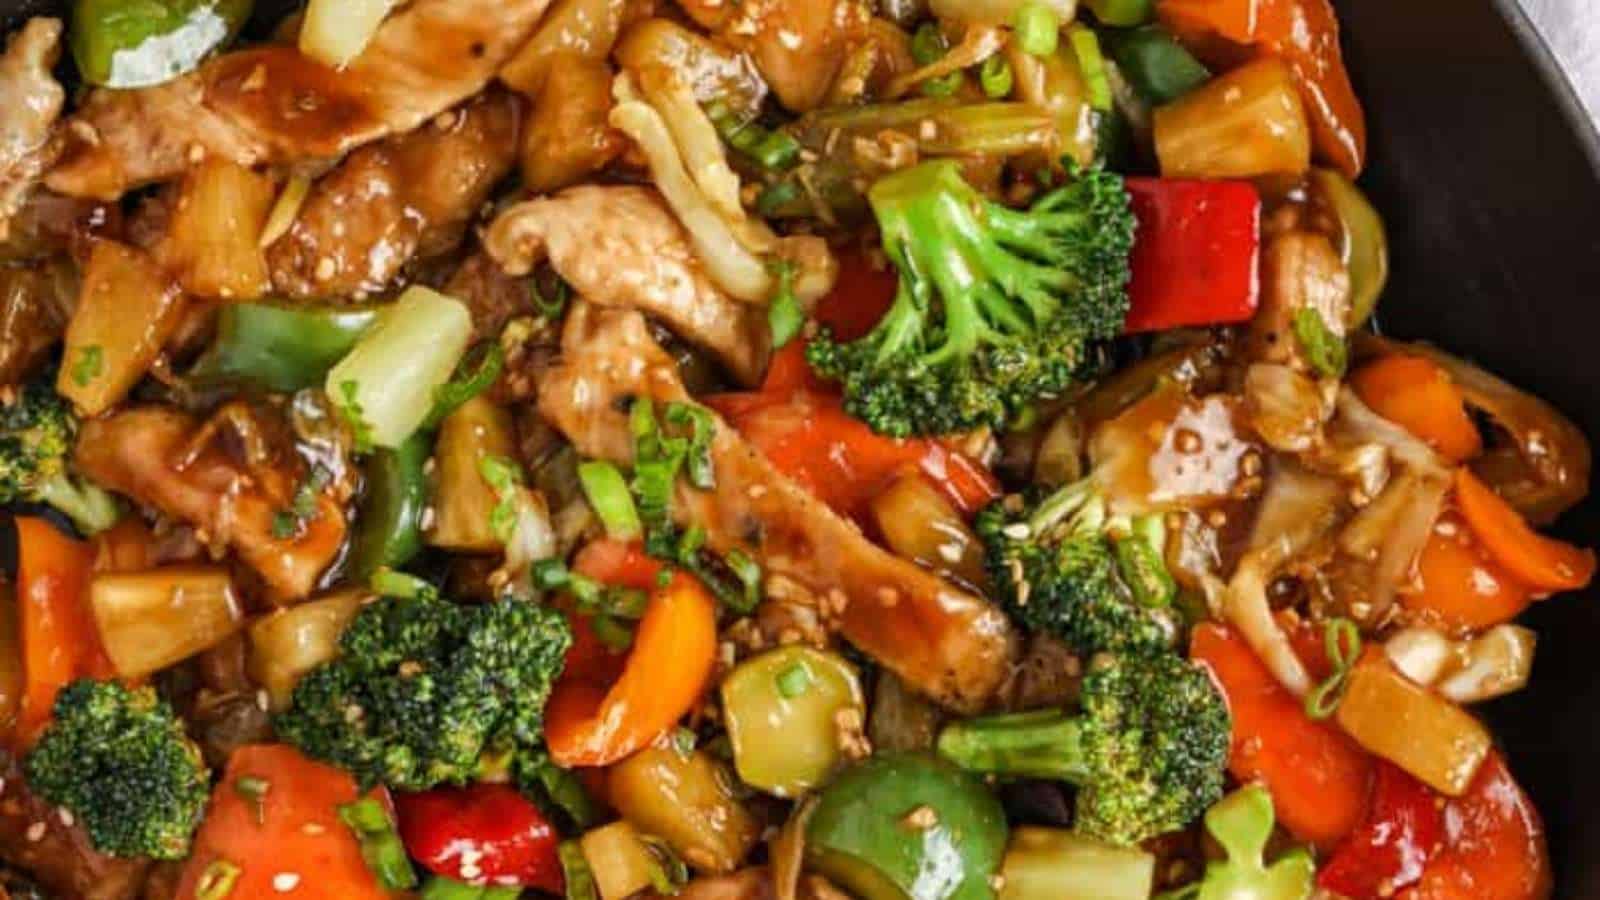 Chicken stir fry in a skillet with vegetables.